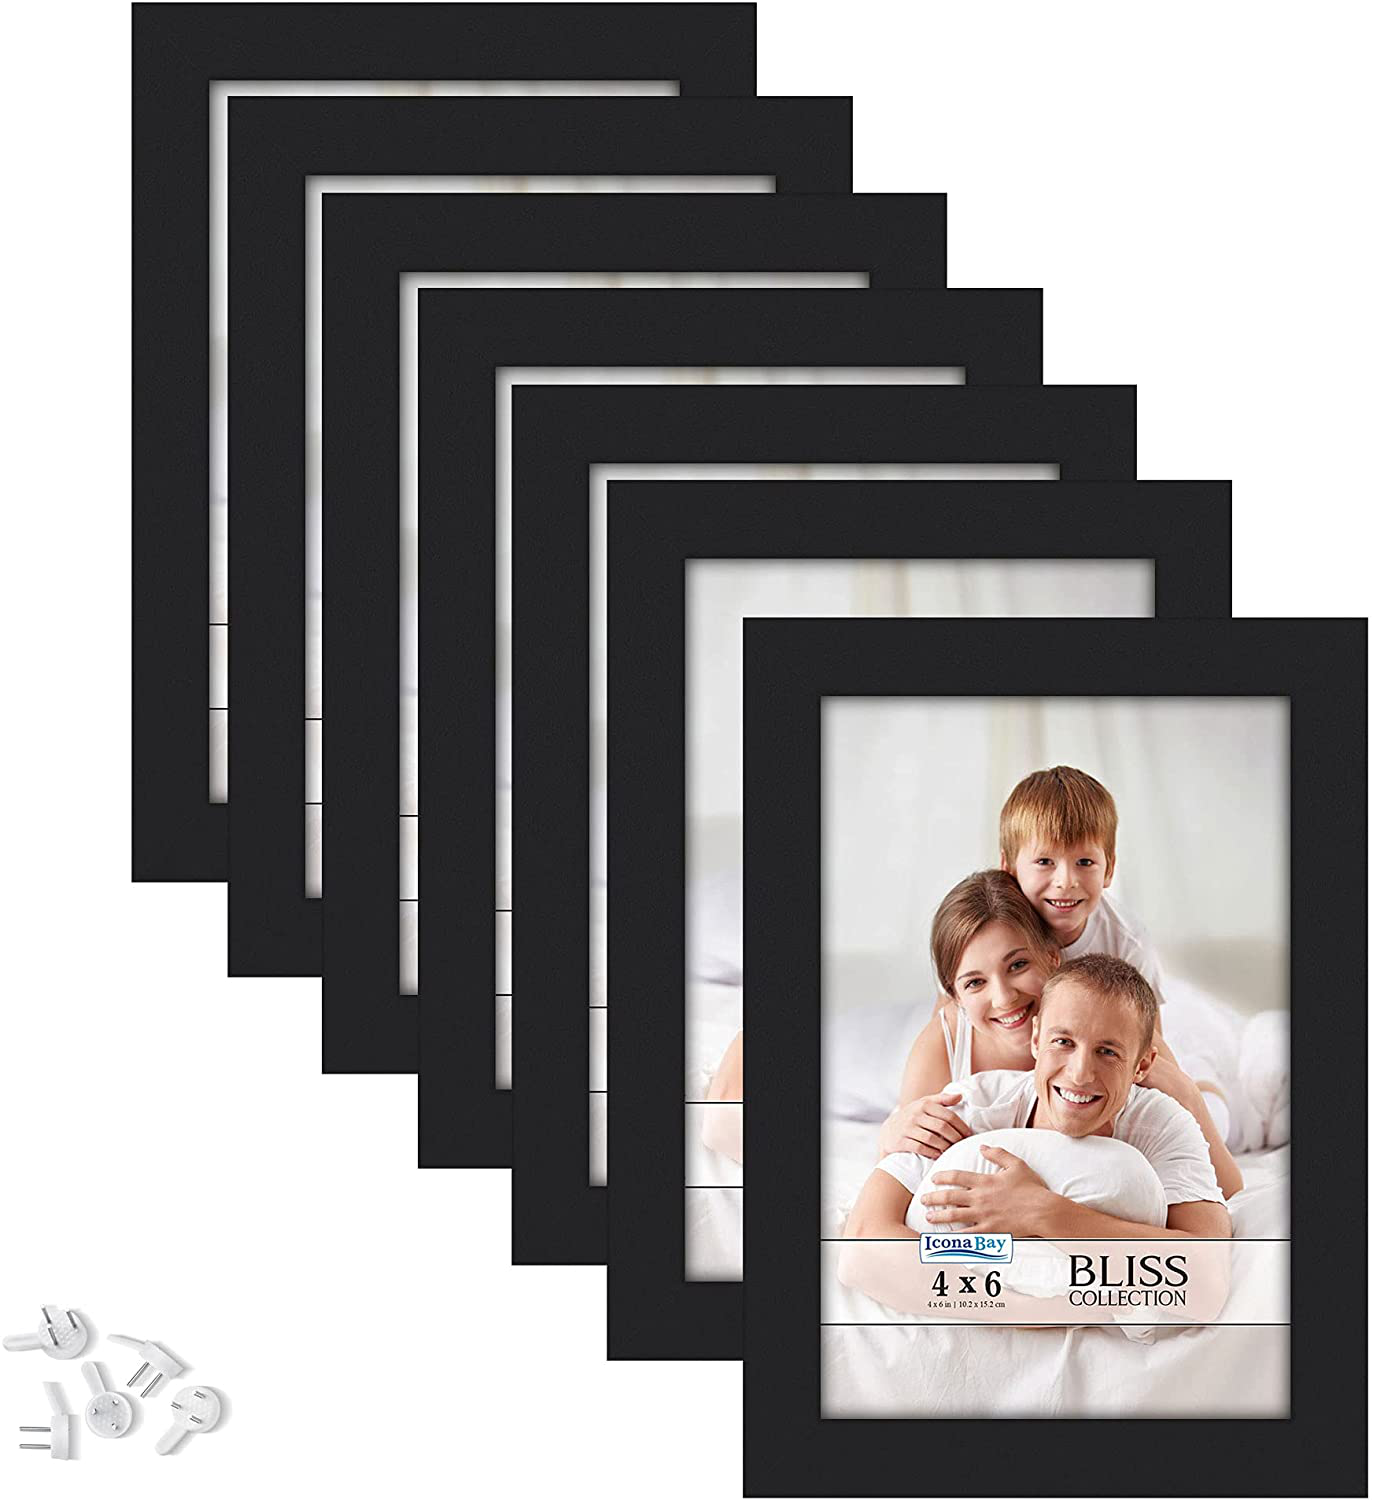 Icona Bay 5x7 Picture Frames (White, 12 Pack), Modern Style Wood Composite Frames Table Top or Wall Mount, Bliss Collection